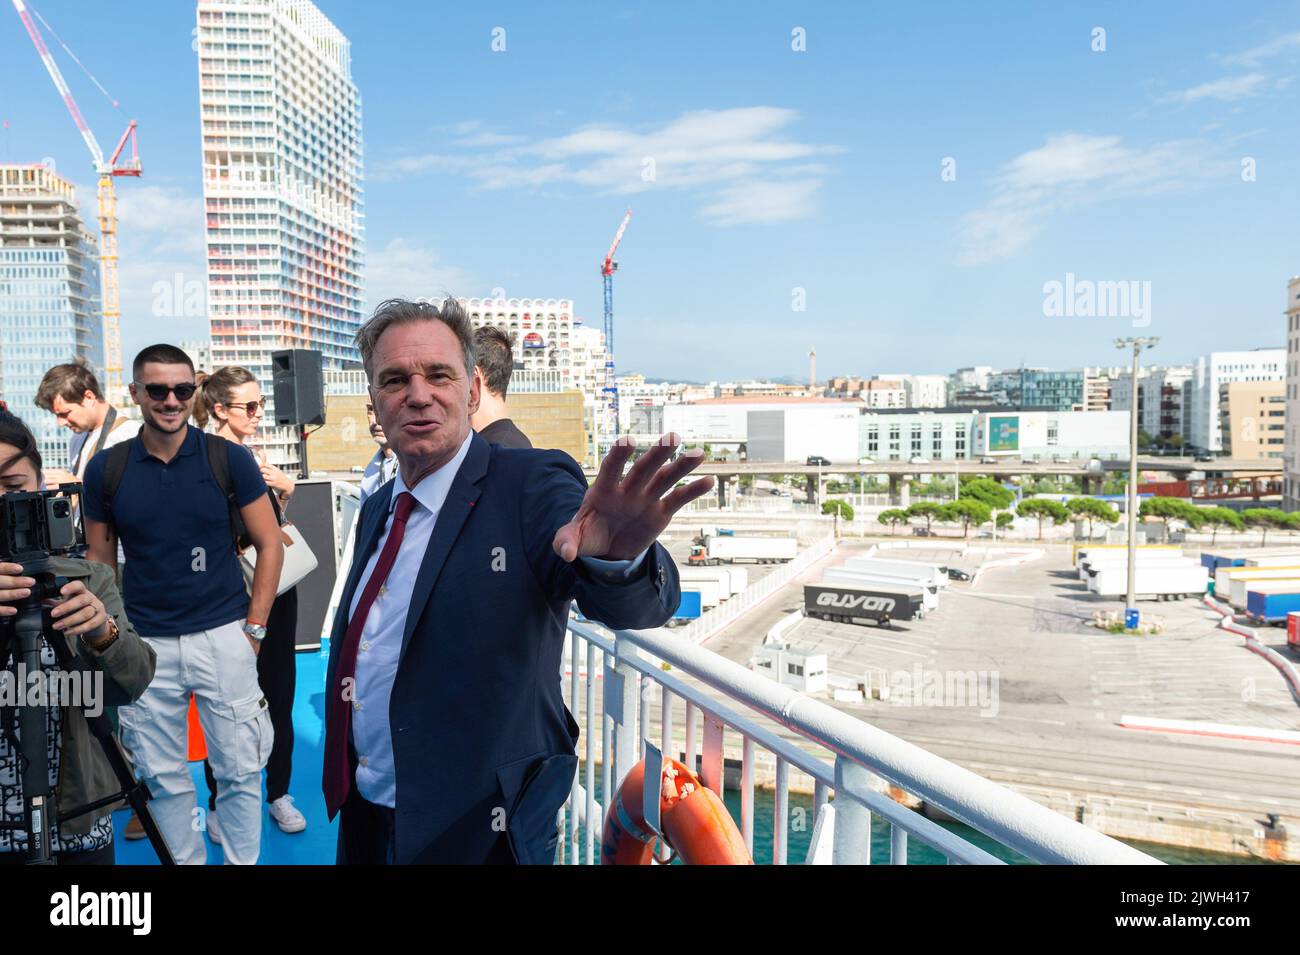 Renaud Muselier, President of Region South reacts during the visit. The Piana is a ferry of the Compagnie Meridionale de Navigation (named La Meridionale) that connects Marseille to Ajaccio. After 5 years of studies and two years of field tests, it is the first ship in the world to be equipped with a particle filter technology that eliminates up to 99.9% of fine and superfine particles. Toxic emissions from shipping in Marseille are a major public health concern. This technology developed by CMN and its technical partners Solvay and Andritz is a world first in the shipping industry. (Photo by Stock Photo